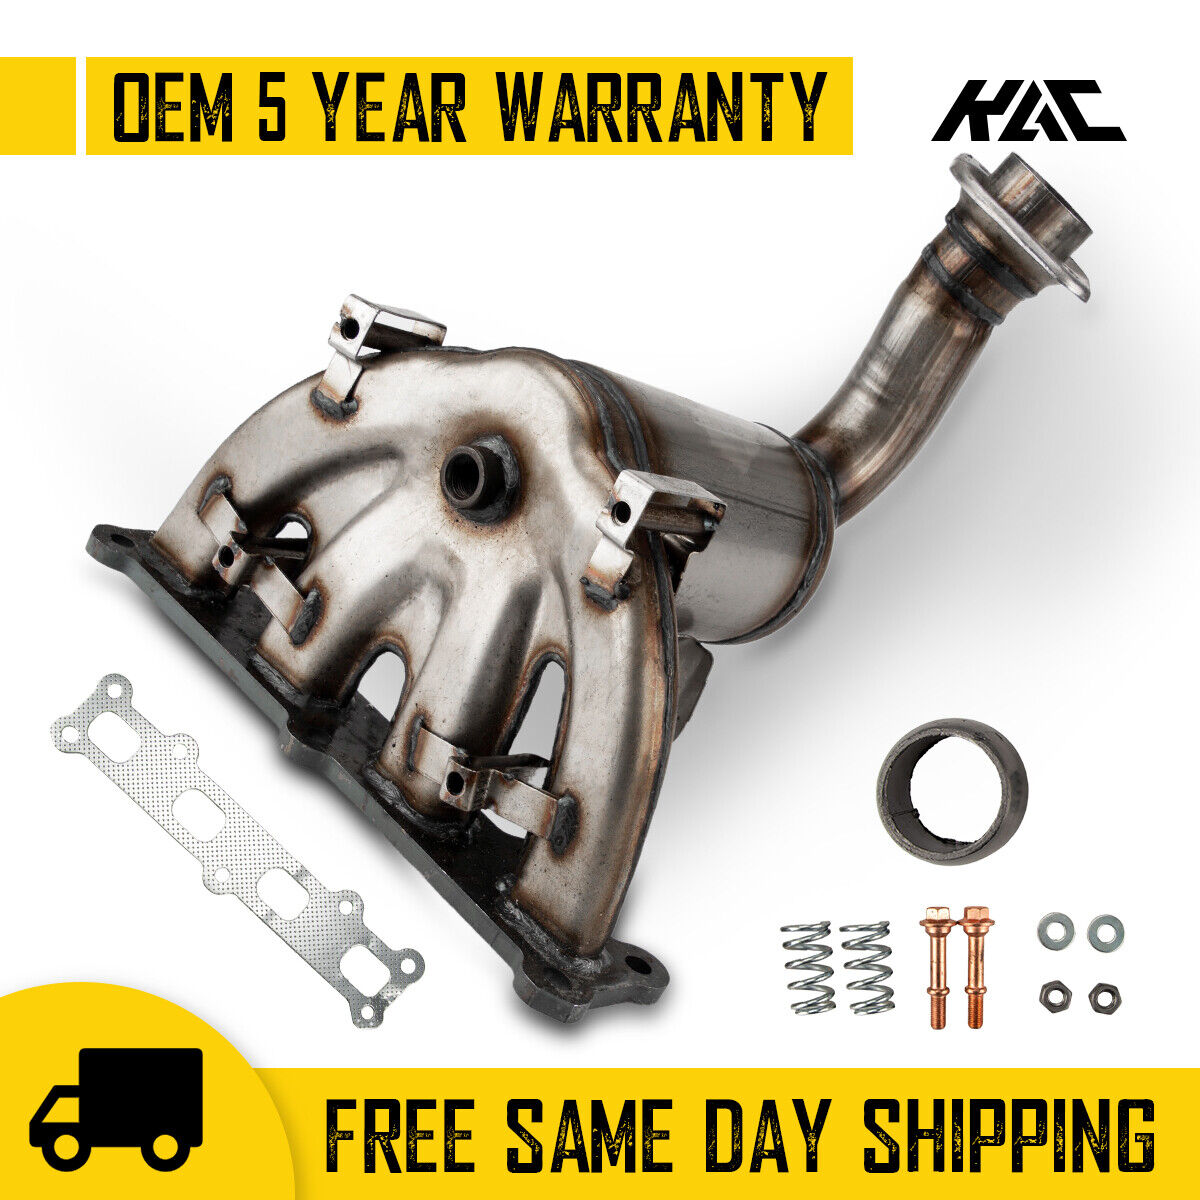 Catalytic Converter Exhaust Manifold For 2007-2008 Dodge Caliber 2.4L AWD Only